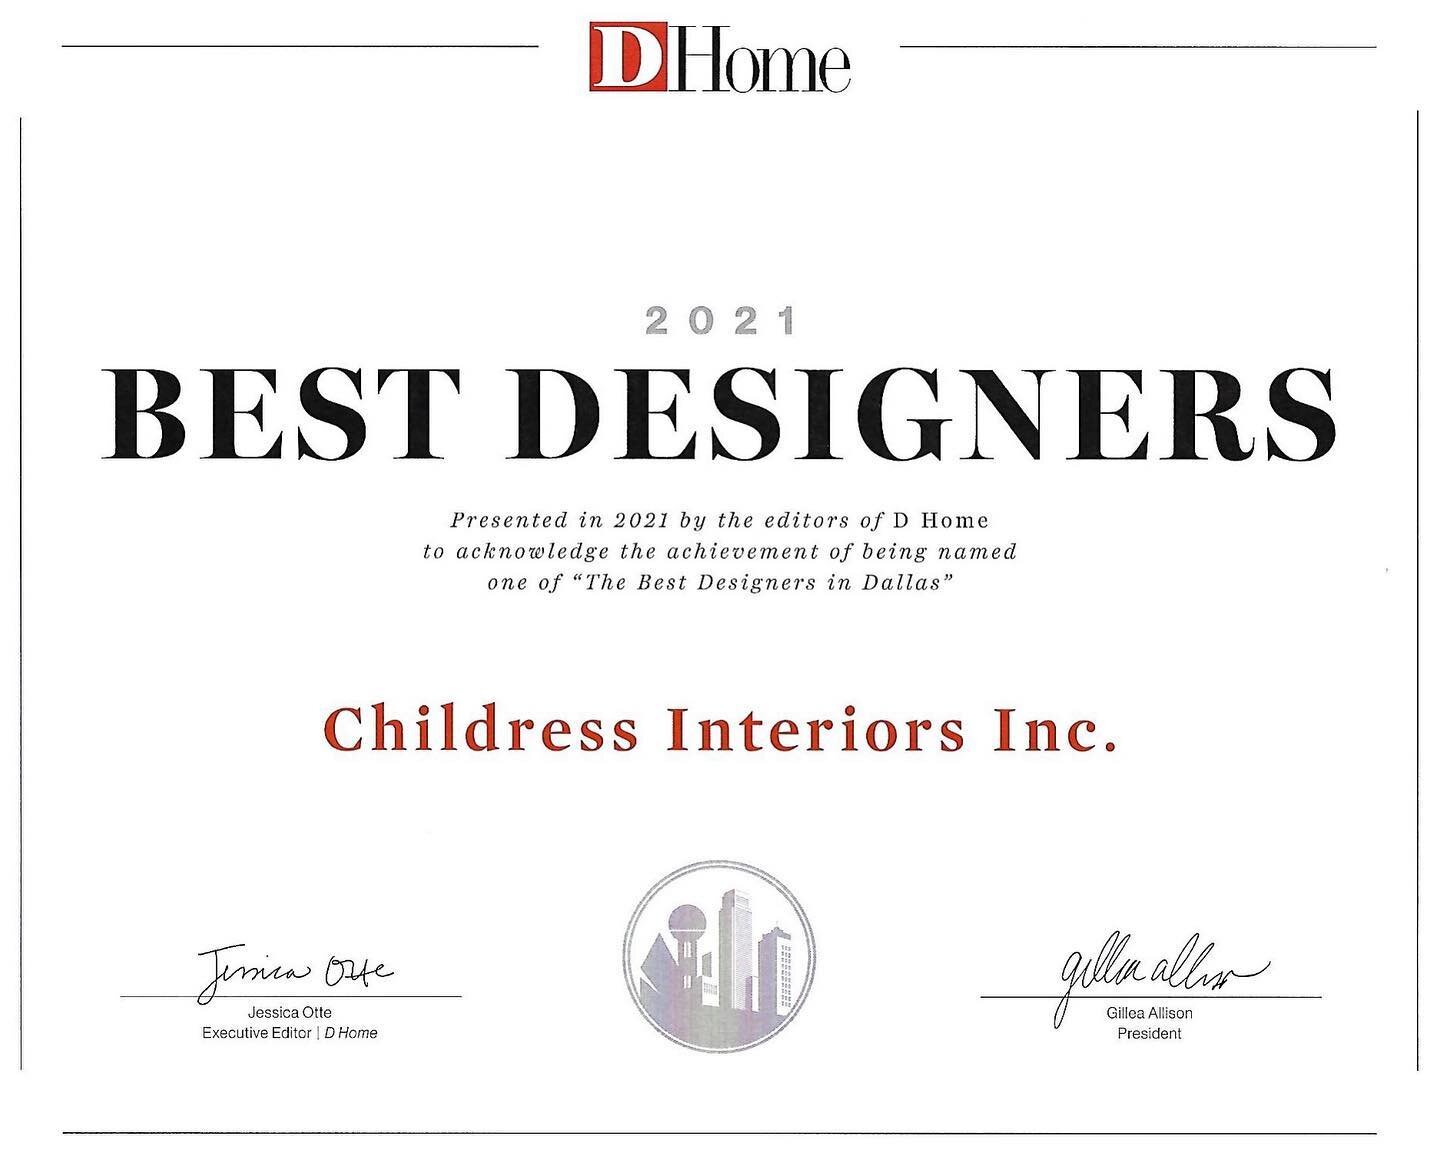 I am honored once again to be selected as a @DHome Best Designer for 2021! Thank you to our wonderful clients, design team, associates, and all who have been part of our continued success!
.
.
.
#childressinteriors #suzychildress #interiordesign #dho